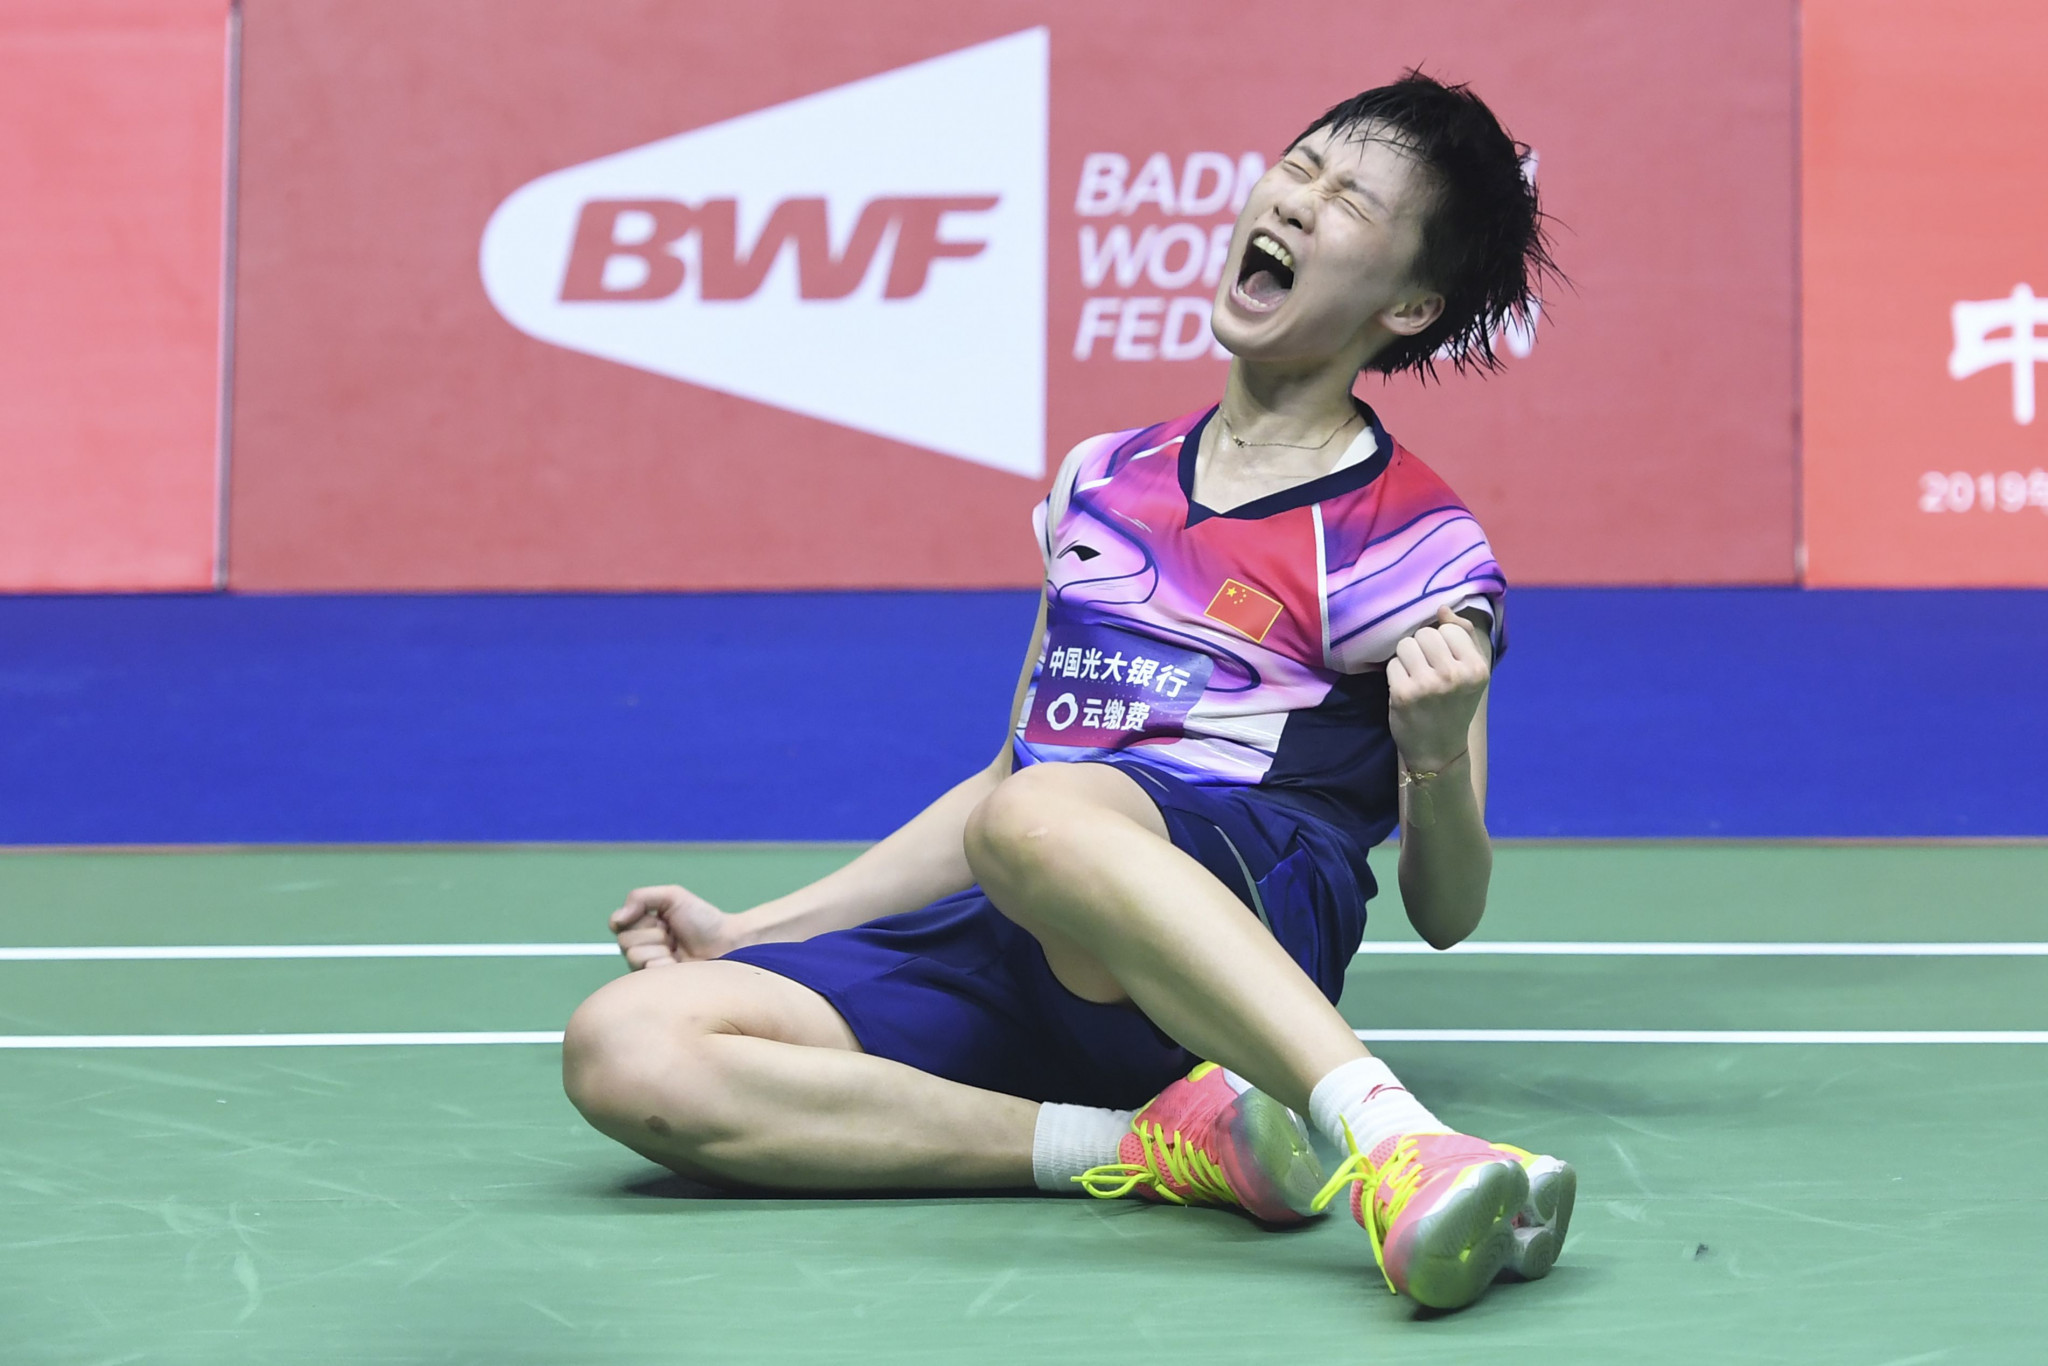 Chen Yufei battled to an all-important women's singles win ©Getty Images